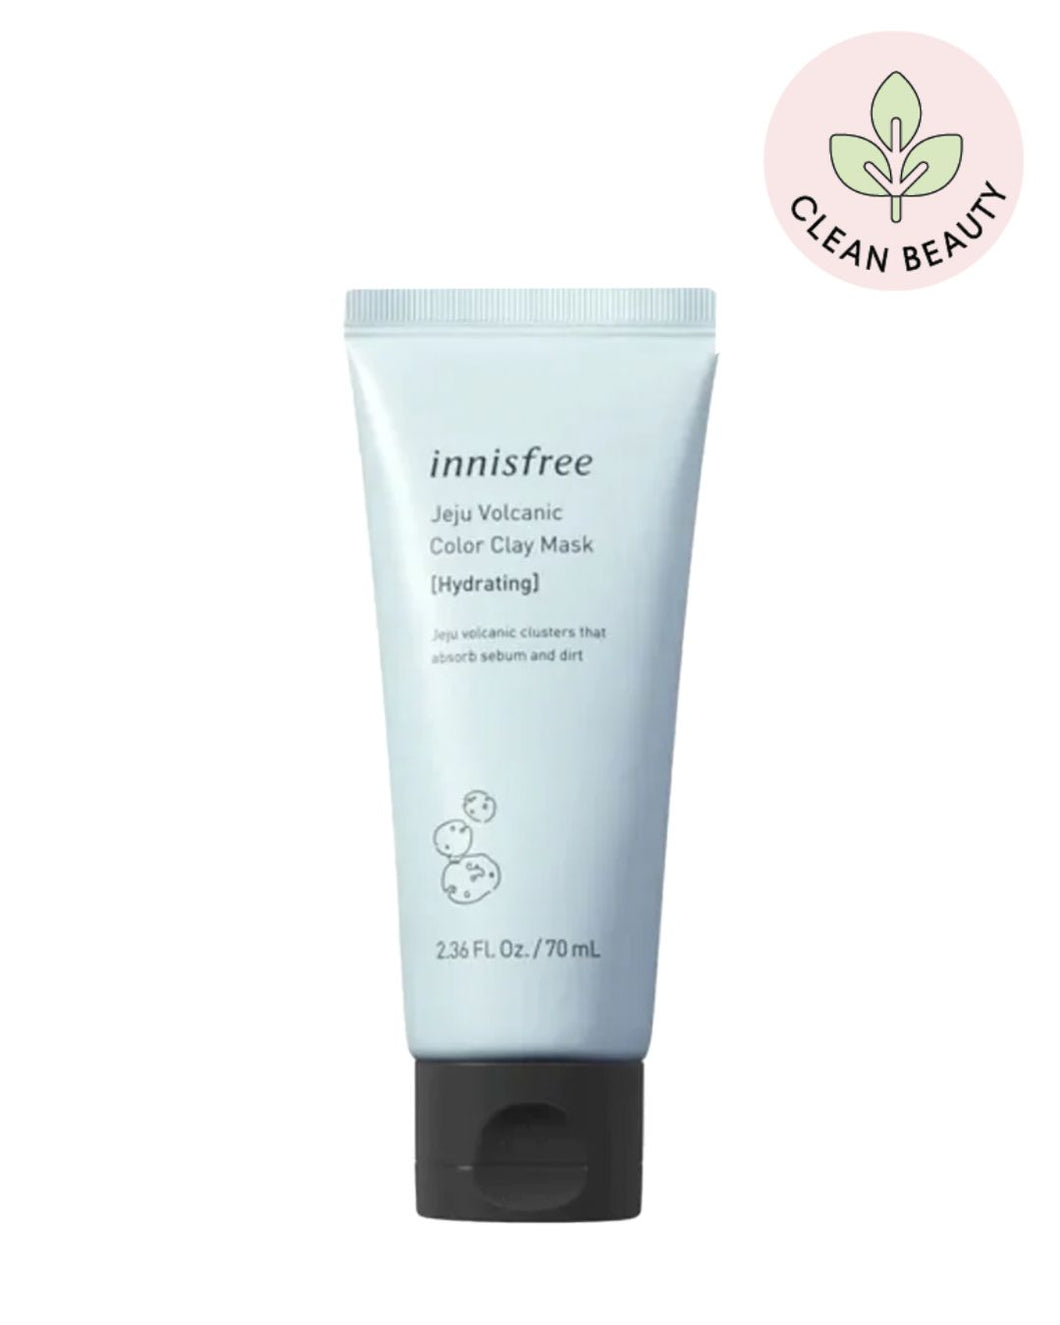 Innisfree - Jeju Volcanic Color Clay Mask / HYDRATING. -70ml